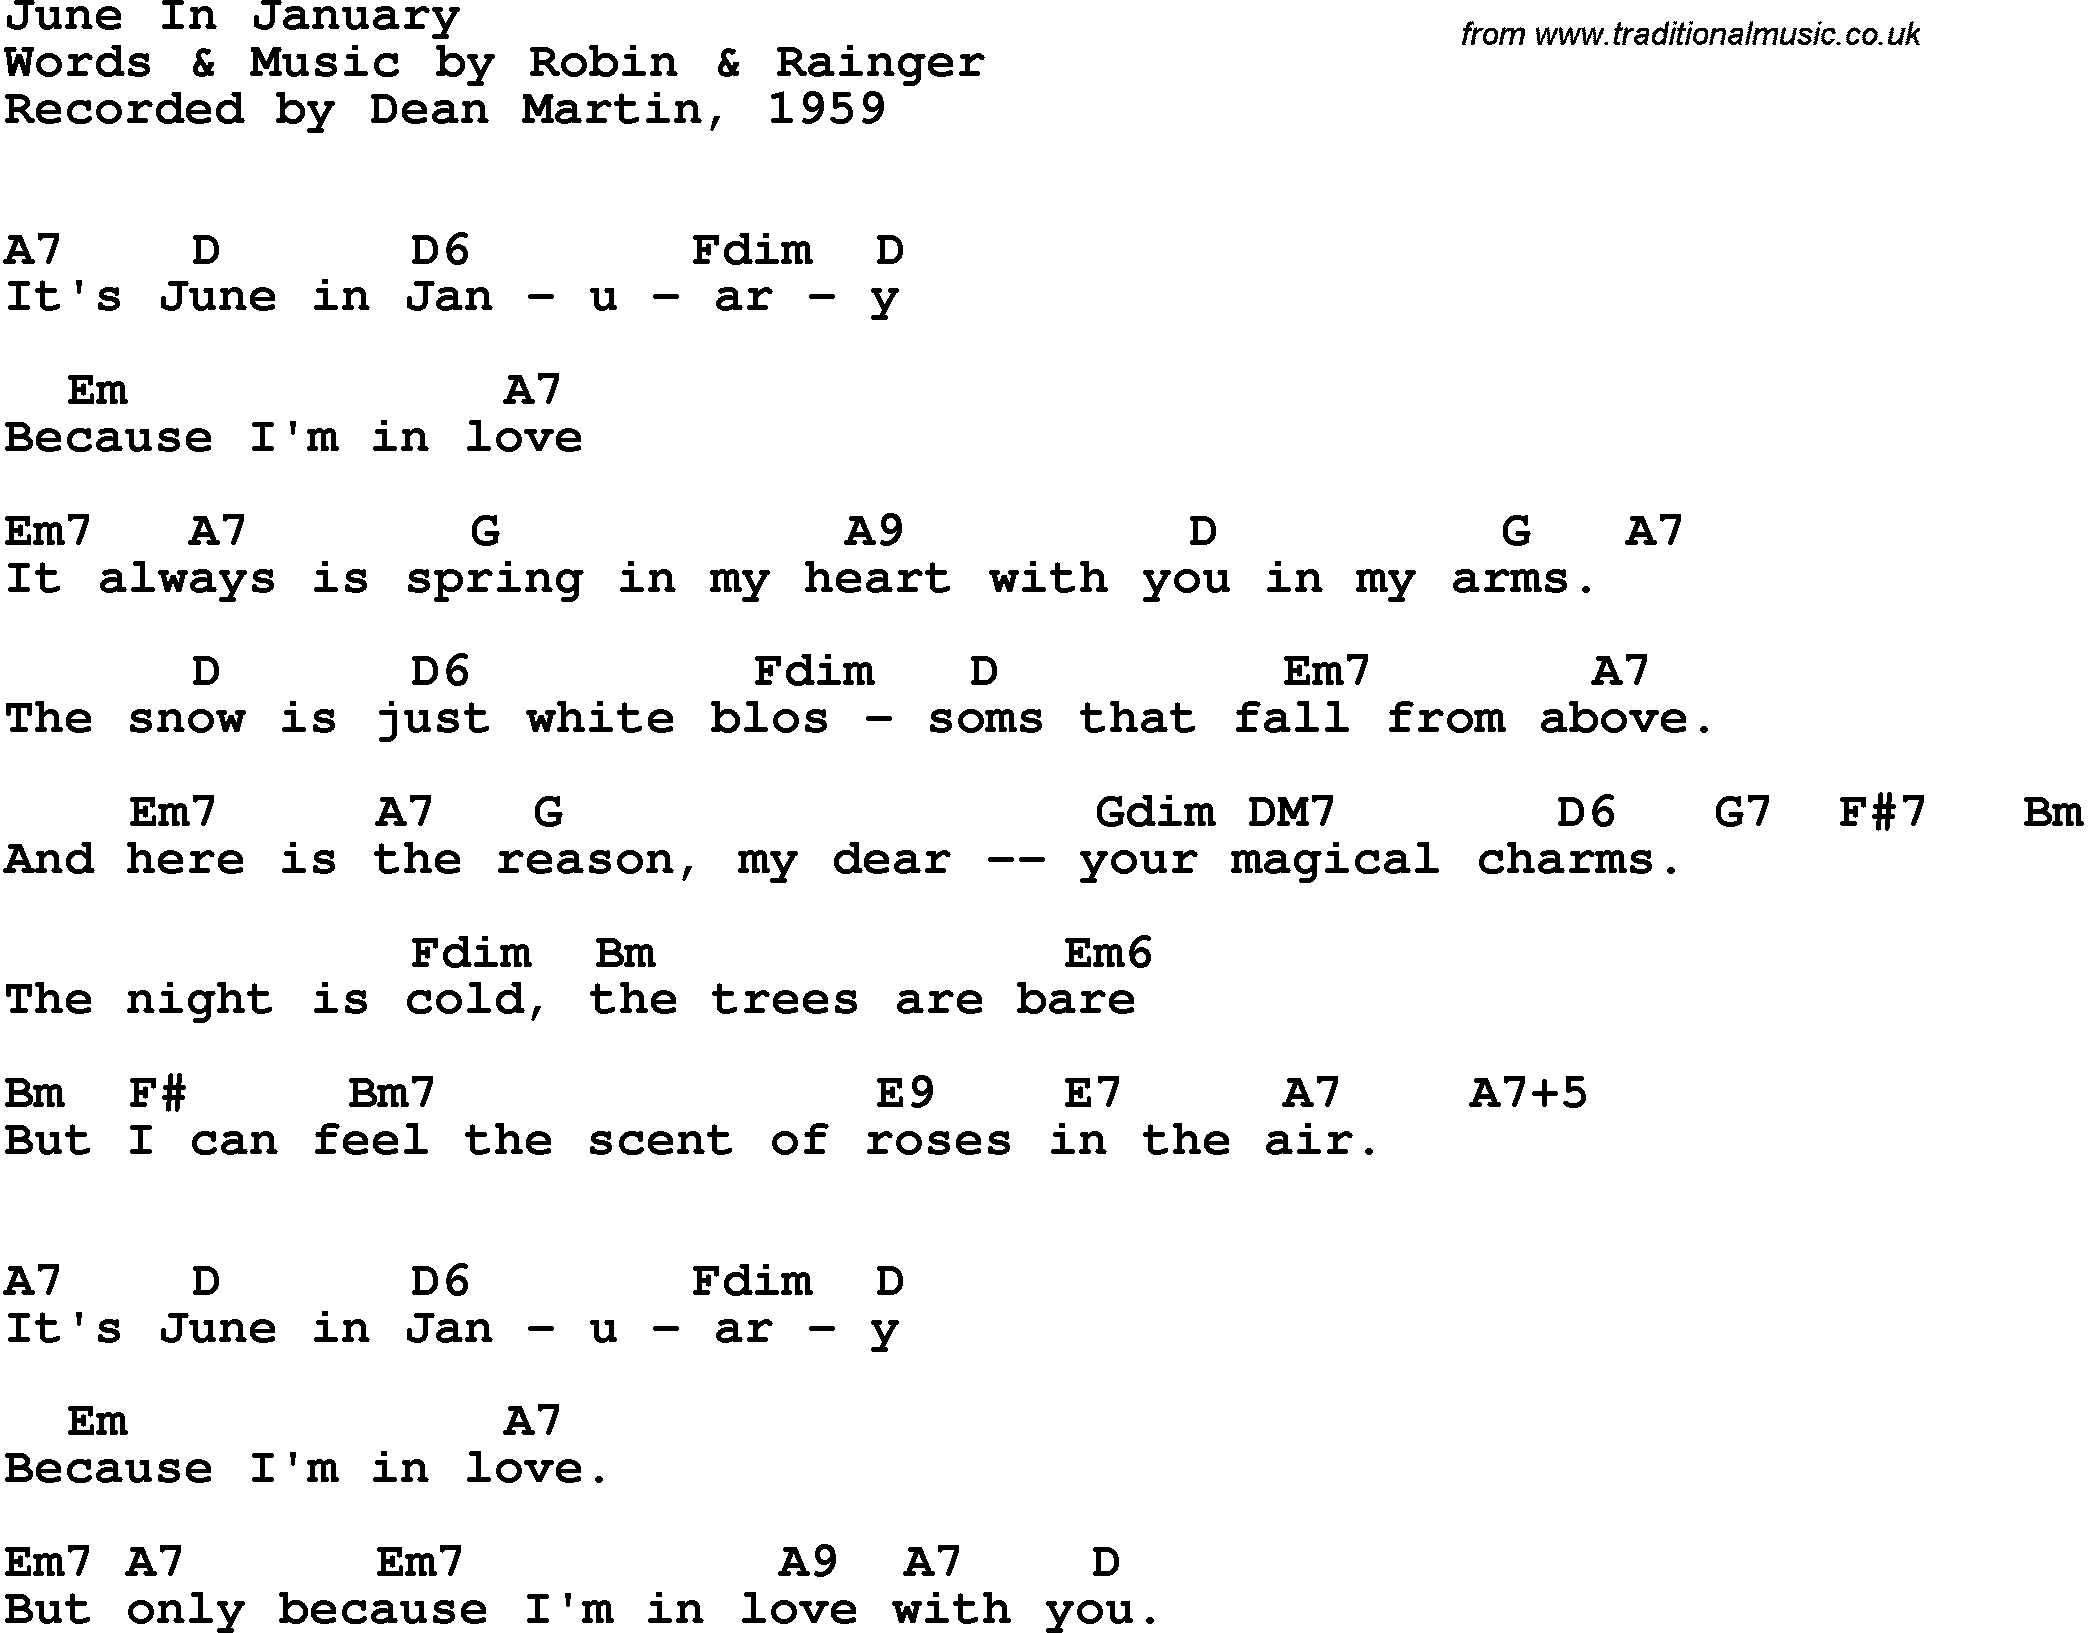 Song Lyrics with guitar chords for June In January - Dean Martin, 1959